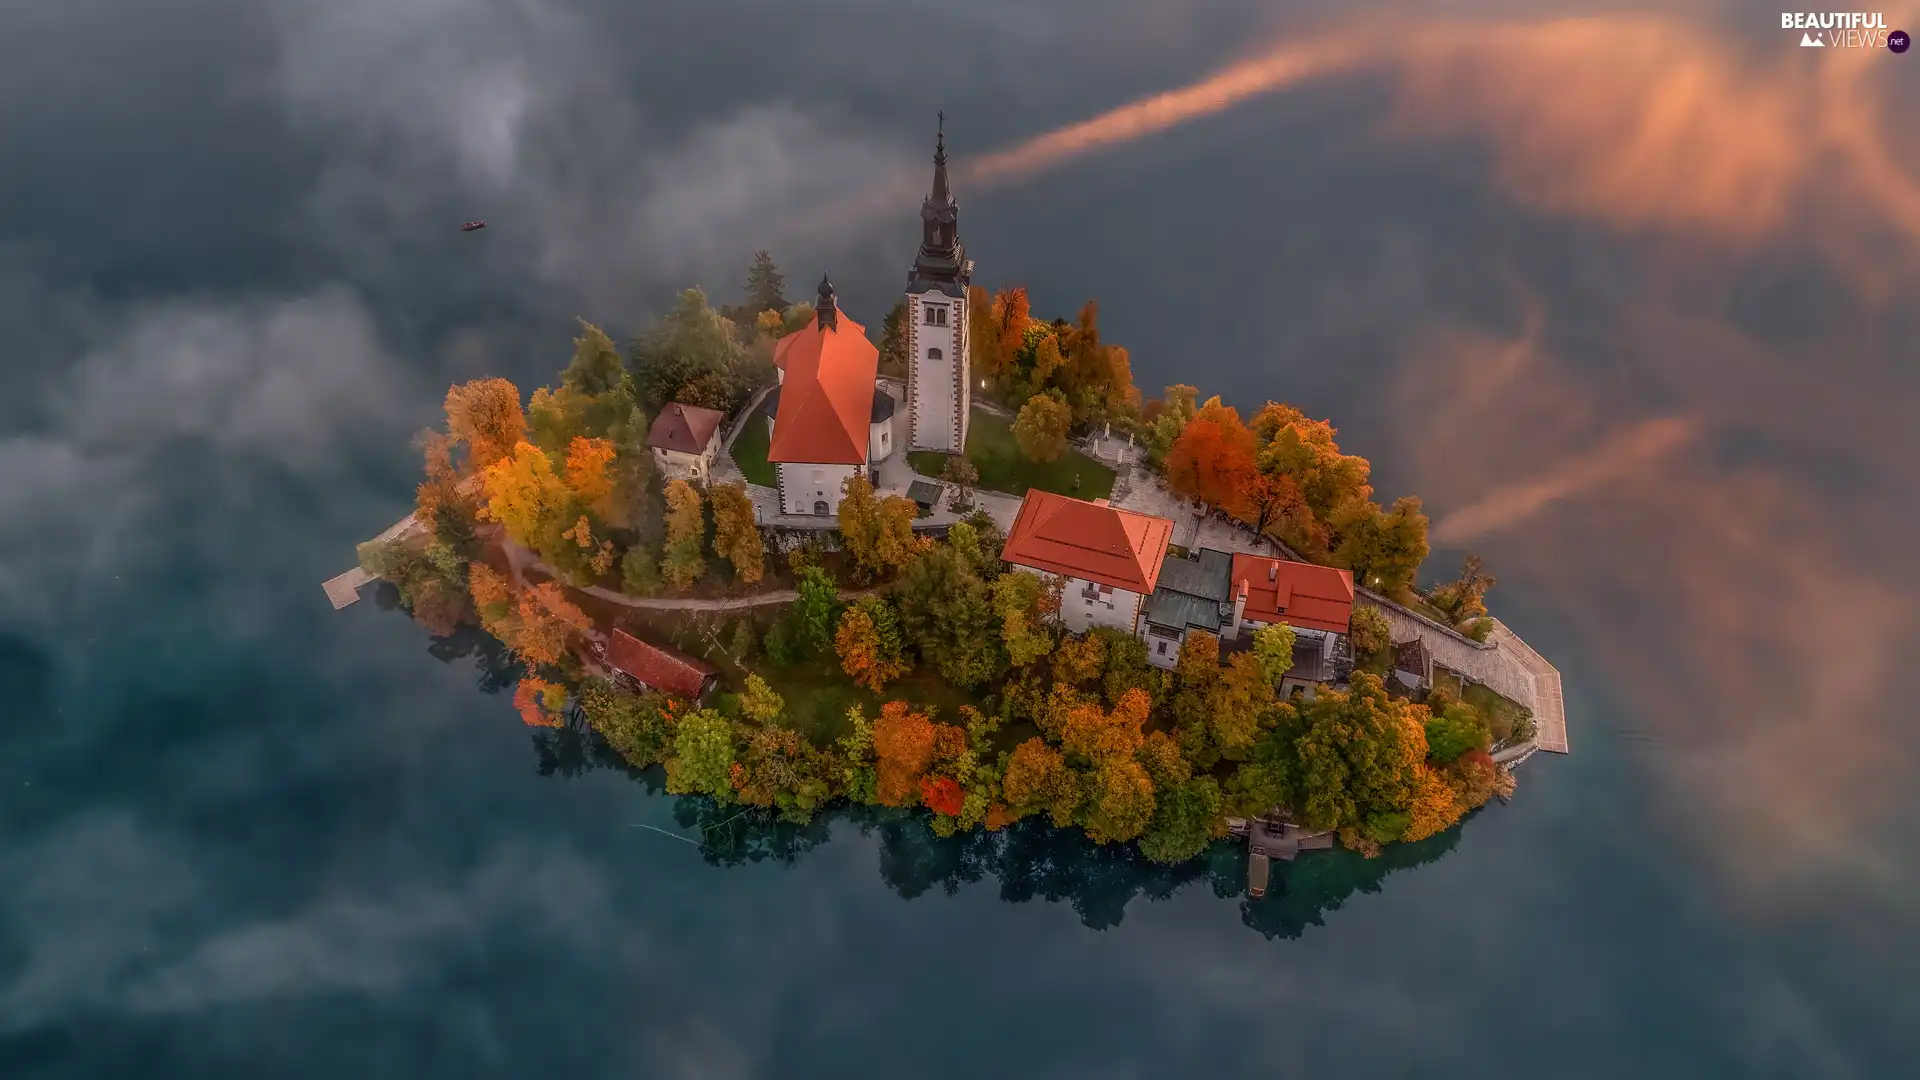 Island, Slovenia, Bled Island, Church of the Annunciation of the Virgin Mary, autumn, Aerial View, trees, viewes, Lake Bled